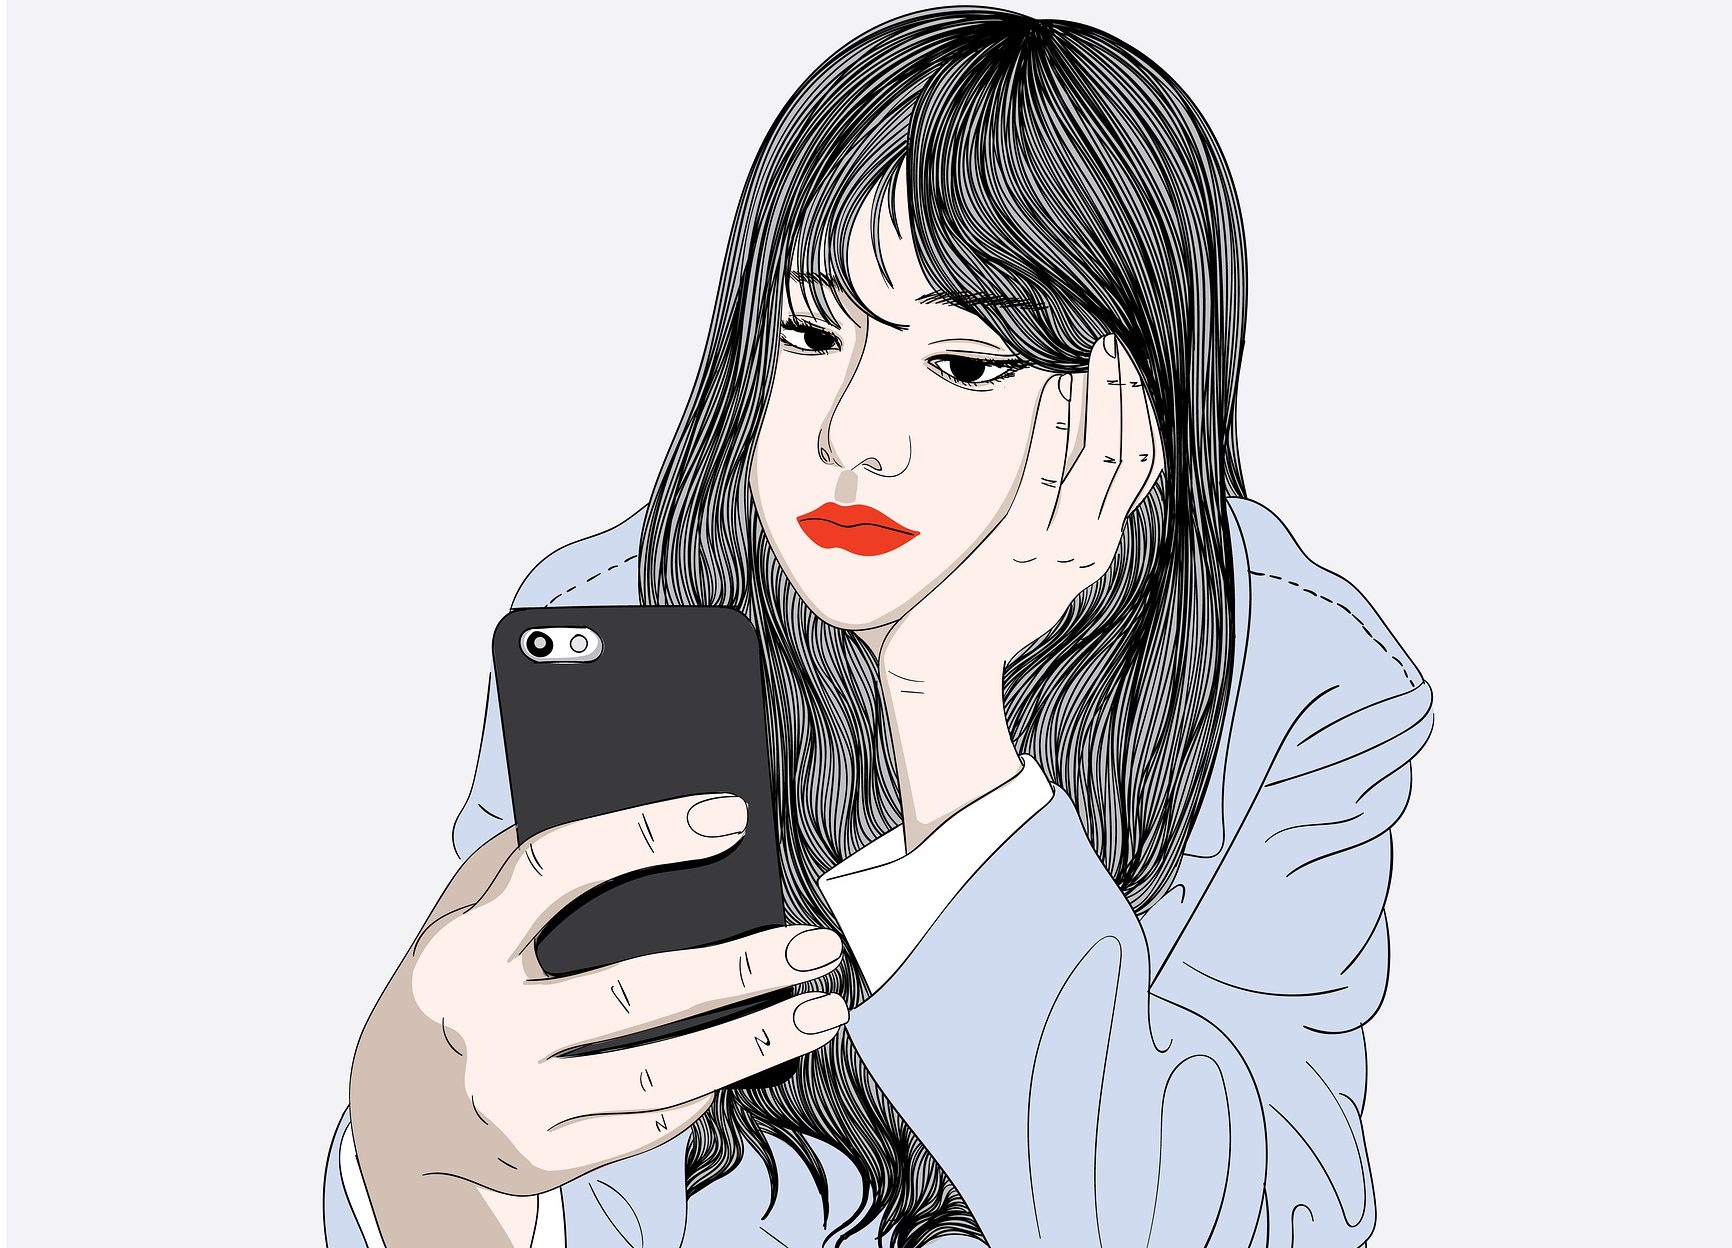 In an article about social media influencers, a woman looks at her phone screen.